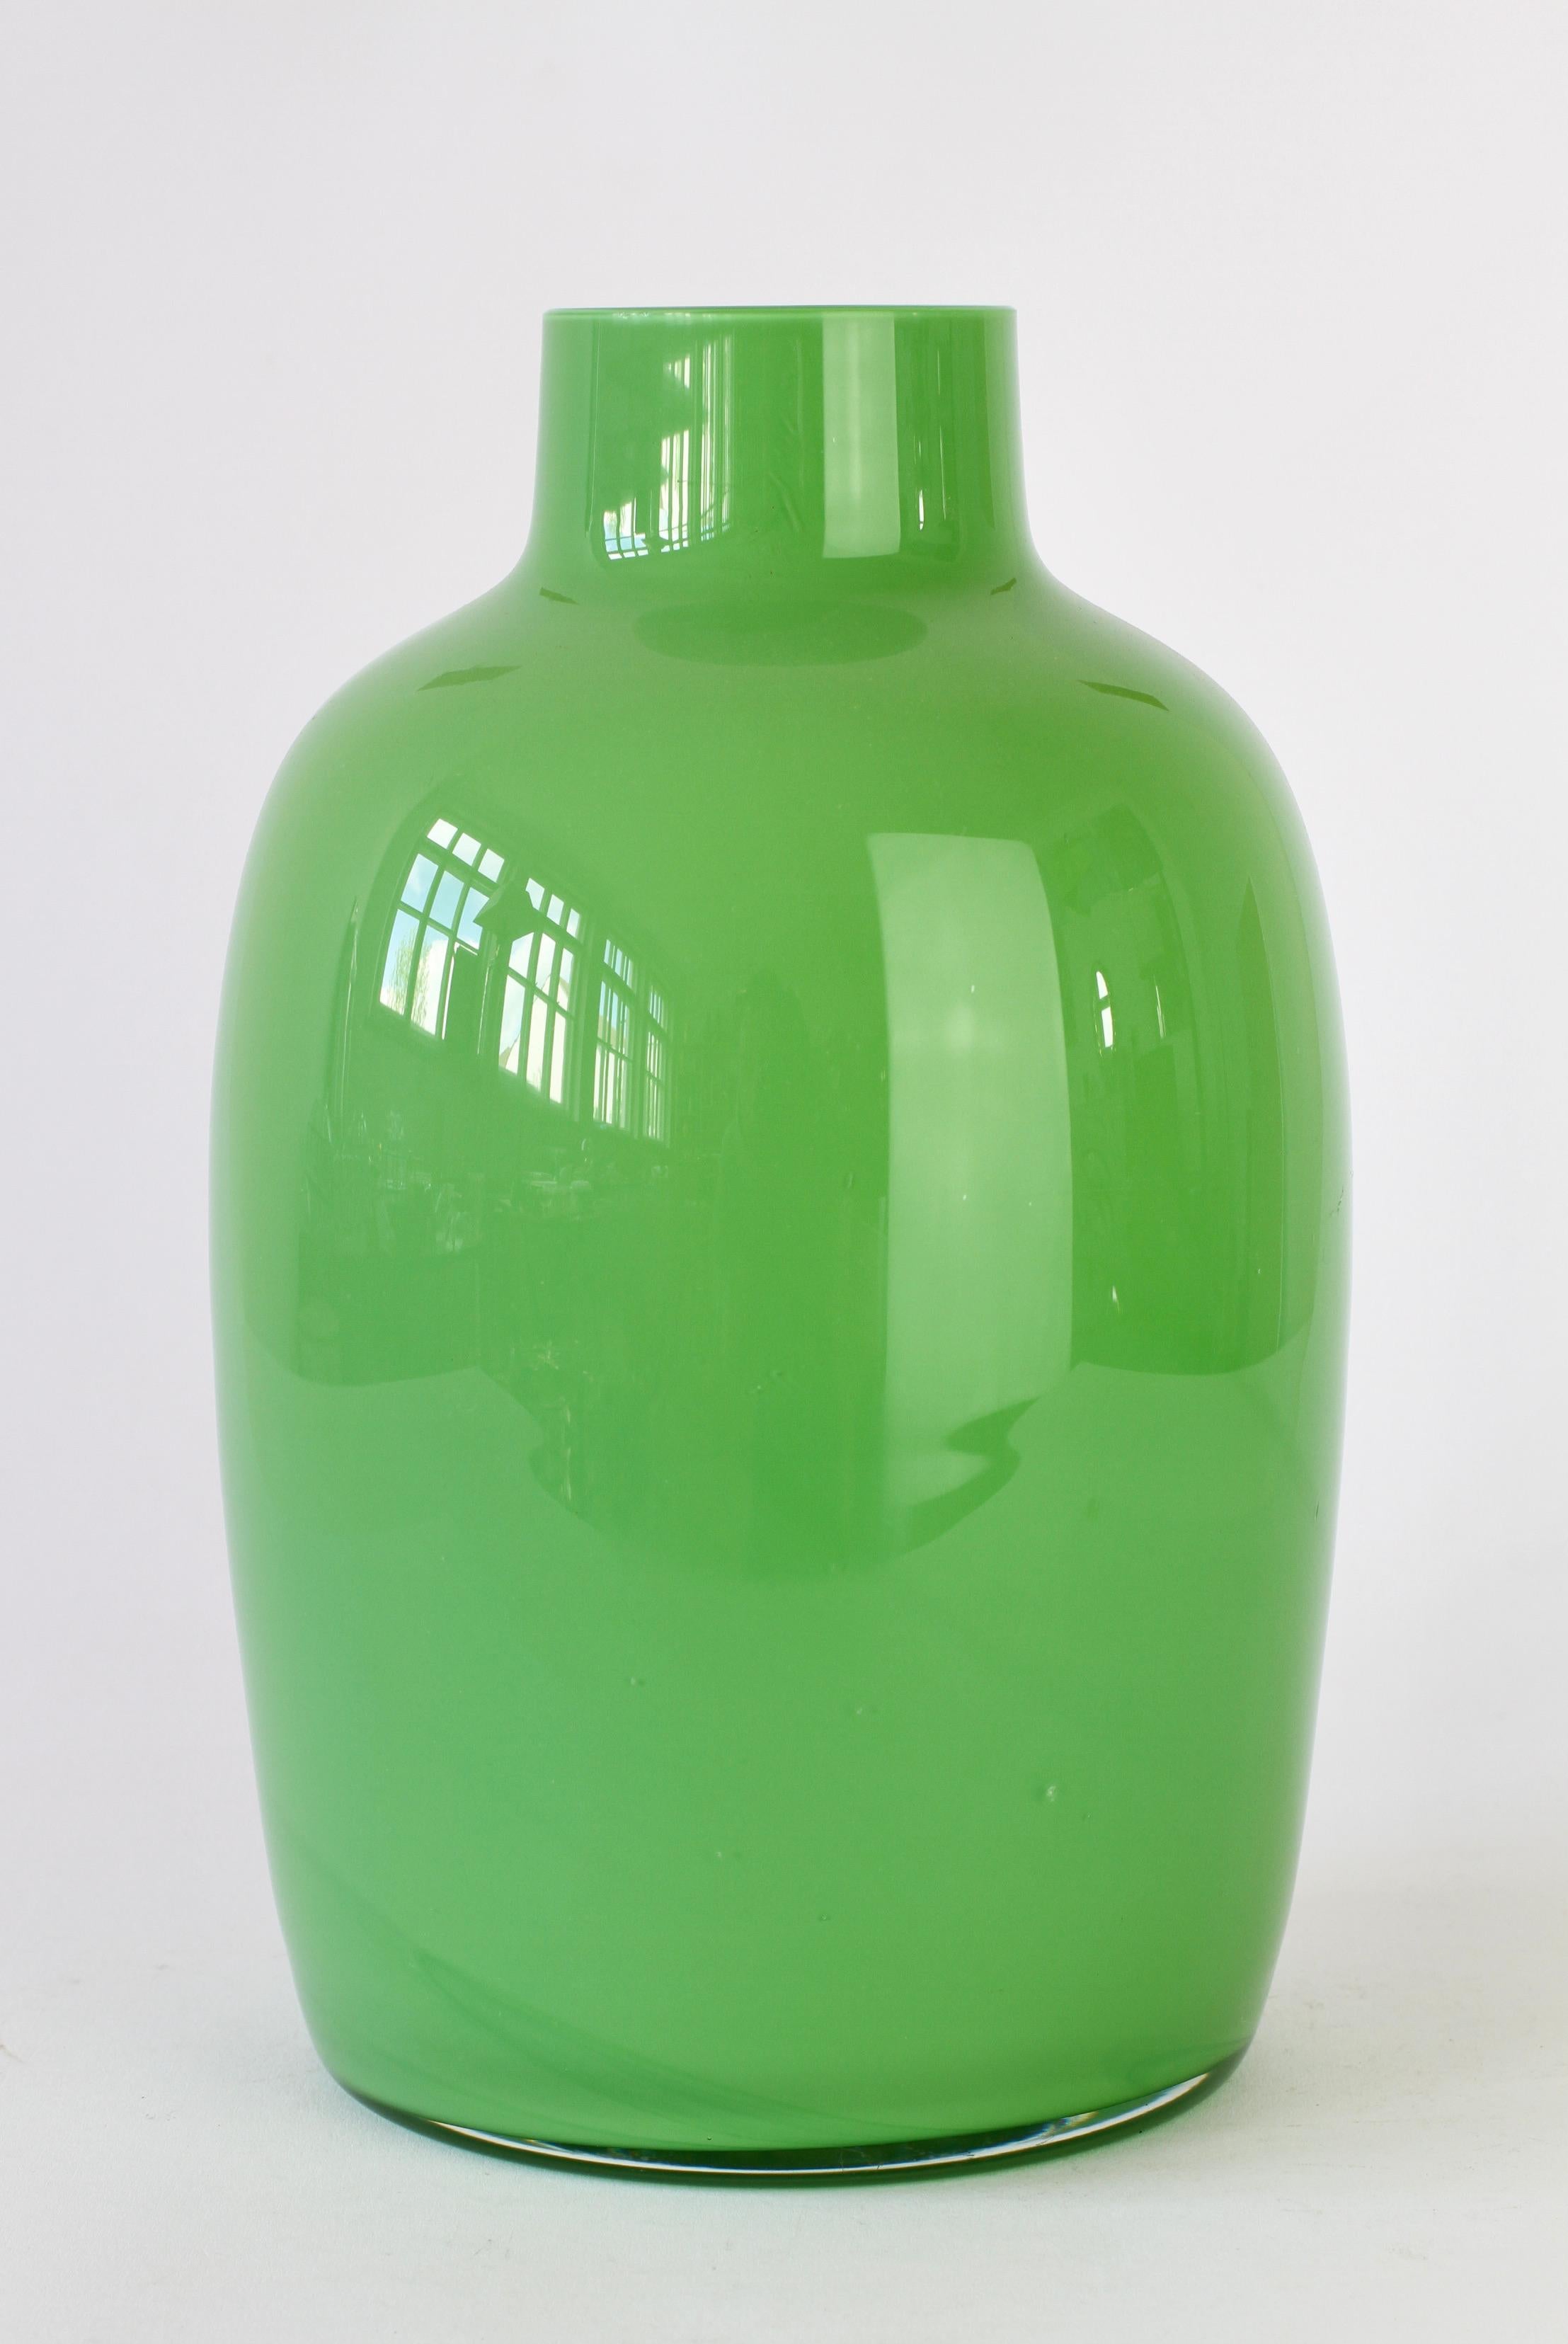 Wonderful tall green vase or urn by Cenedese Vetri of Murano, Italy. A fun, funky and bright way to add a touch of bold colour / color to your interior - imagine glass like this on open, white shelving in a kitchen, bathroom or in a display cabinet.